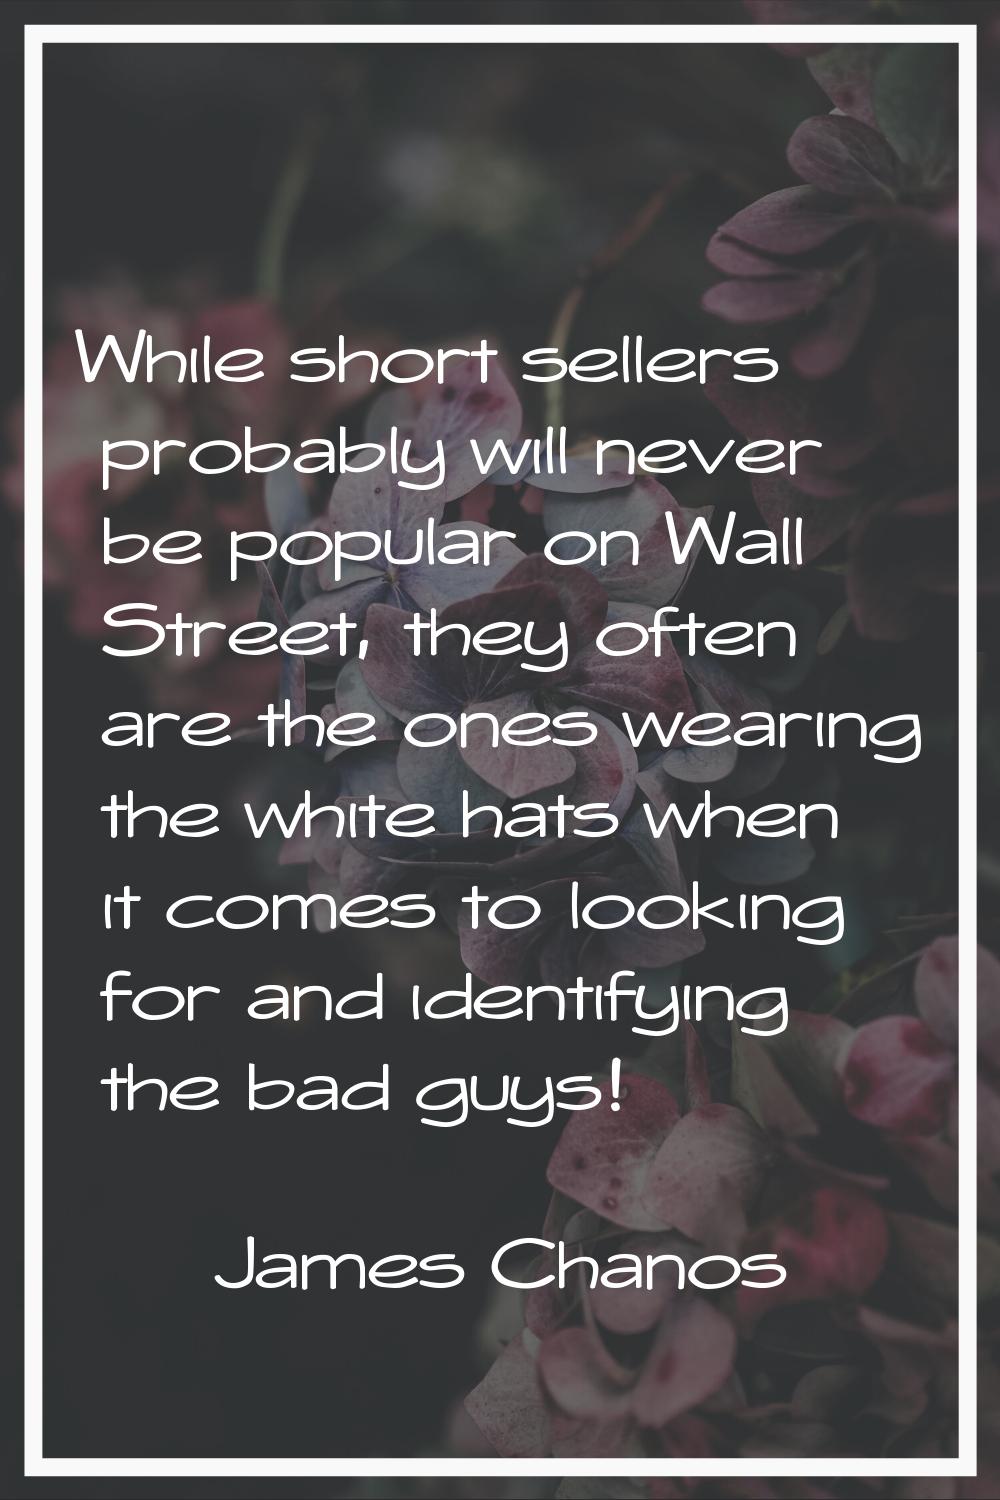 While short sellers probably will never be popular on Wall Street, they often are the ones wearing 